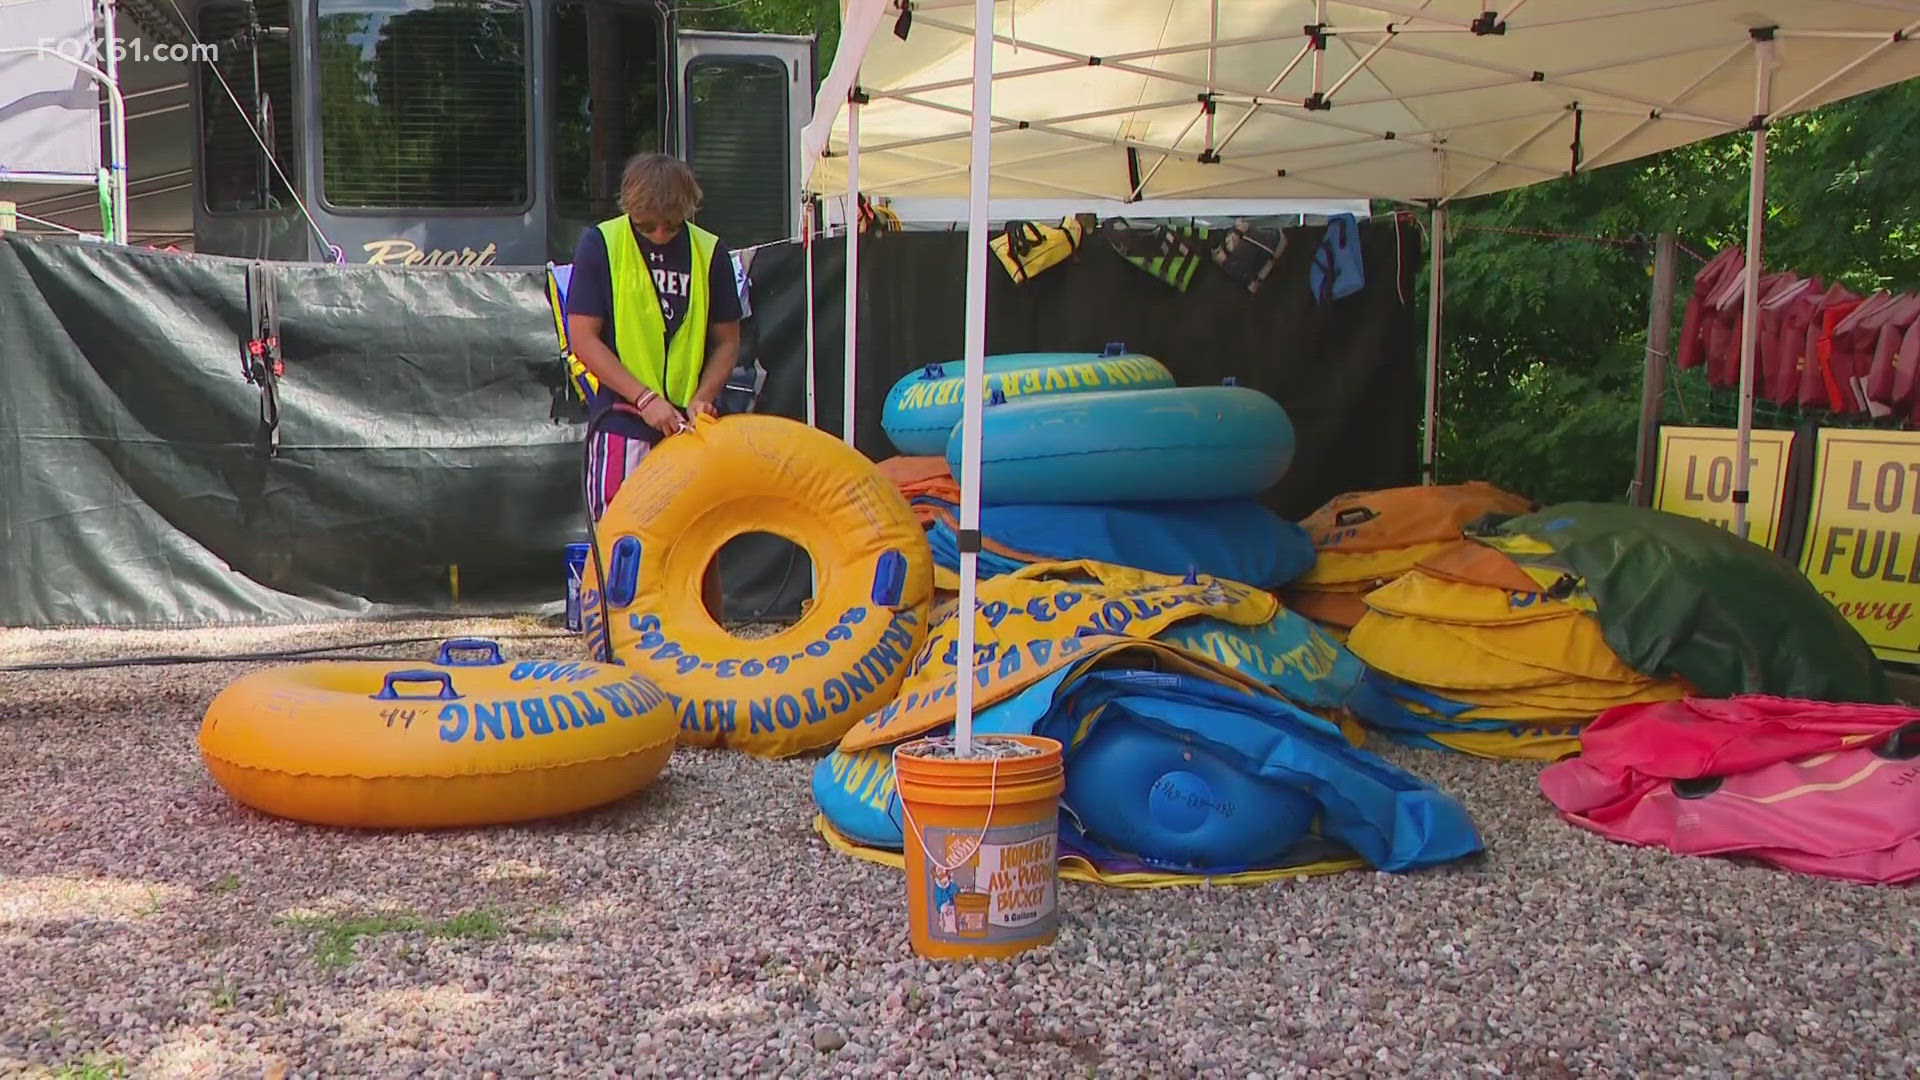 Last year, many businesses along the Farmington River had to fight against flooding, but in New Hartford, Farmington River Tubing is looking to change its fortunes.